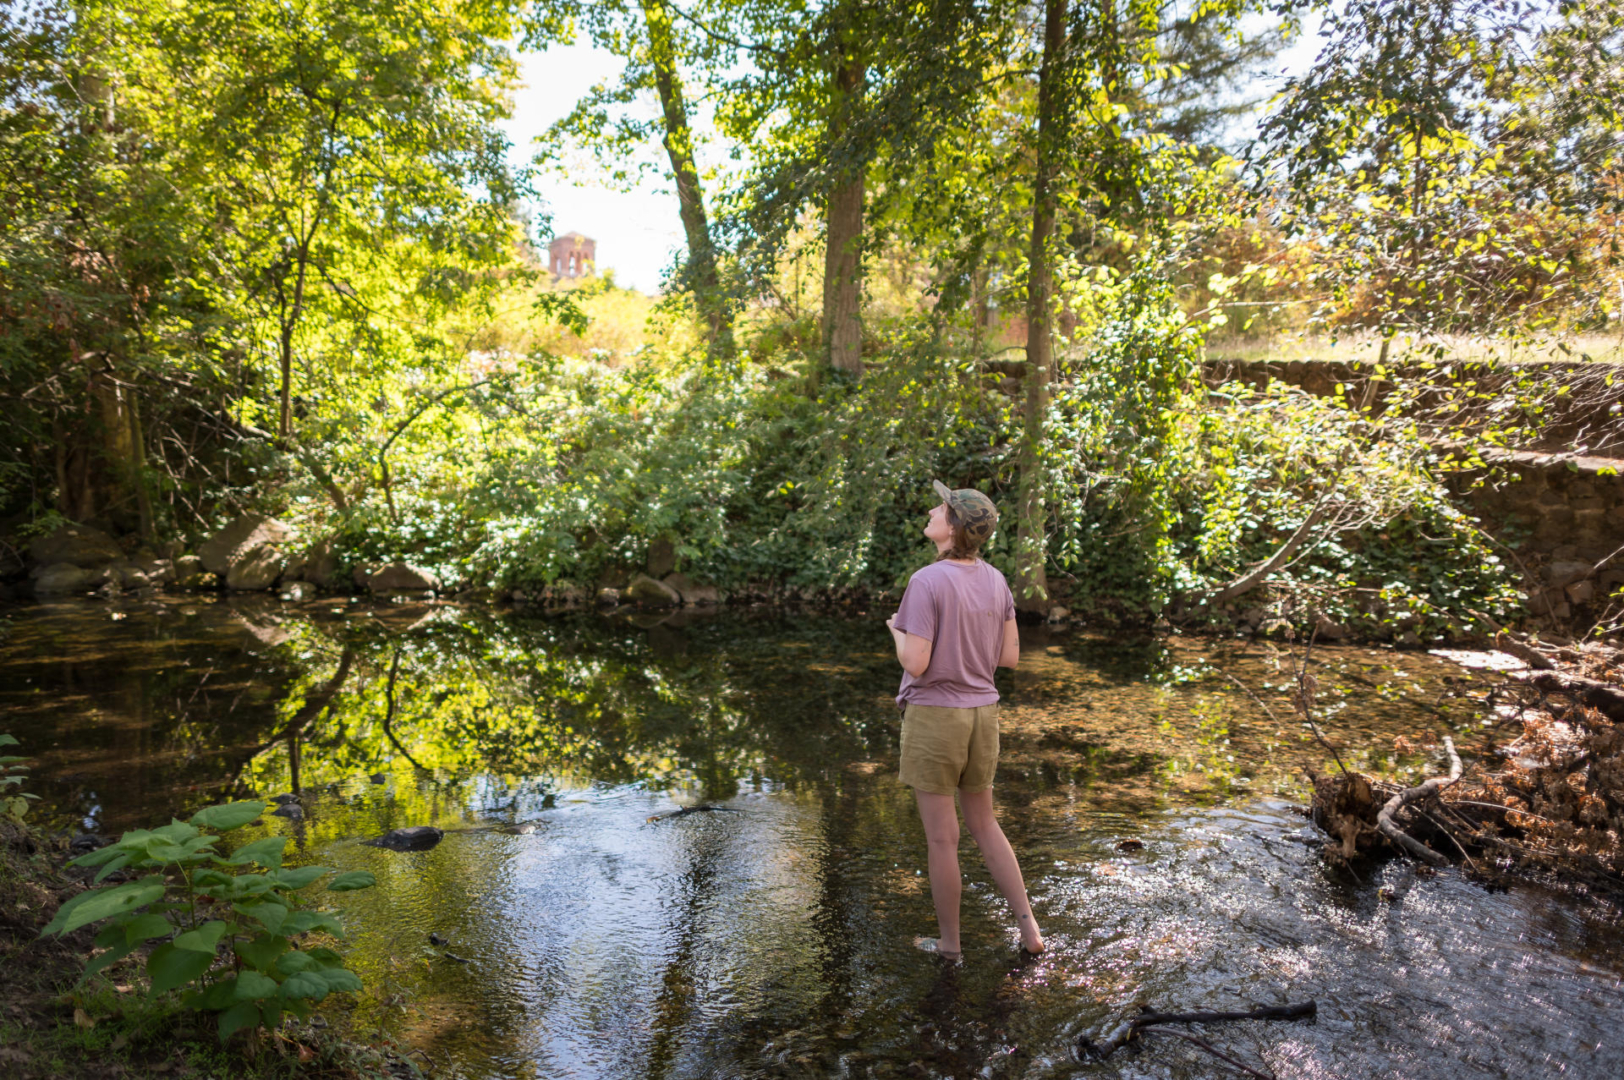 Blake Ellis stands barefoot in a creek while staring up at trees